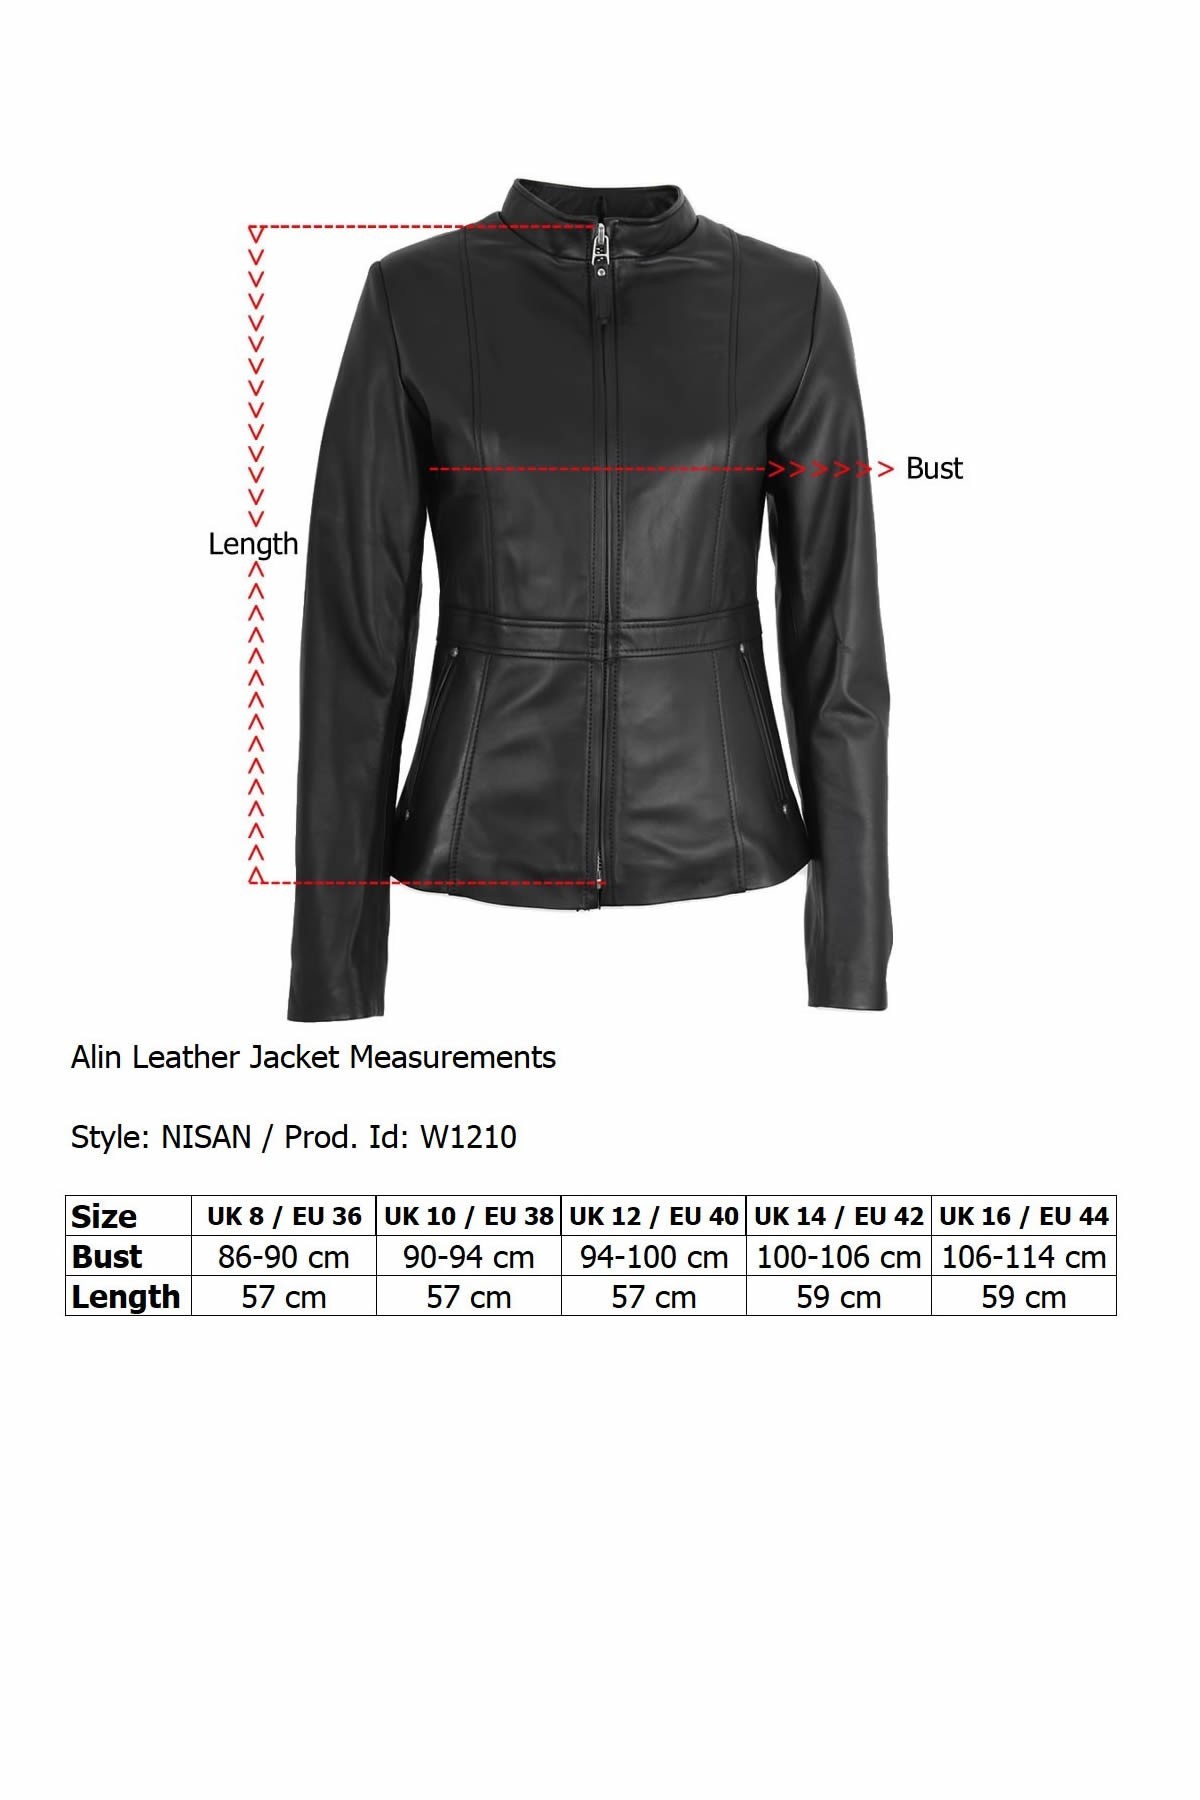 Real Black Leather Jacket Womens - Nisan W1210A